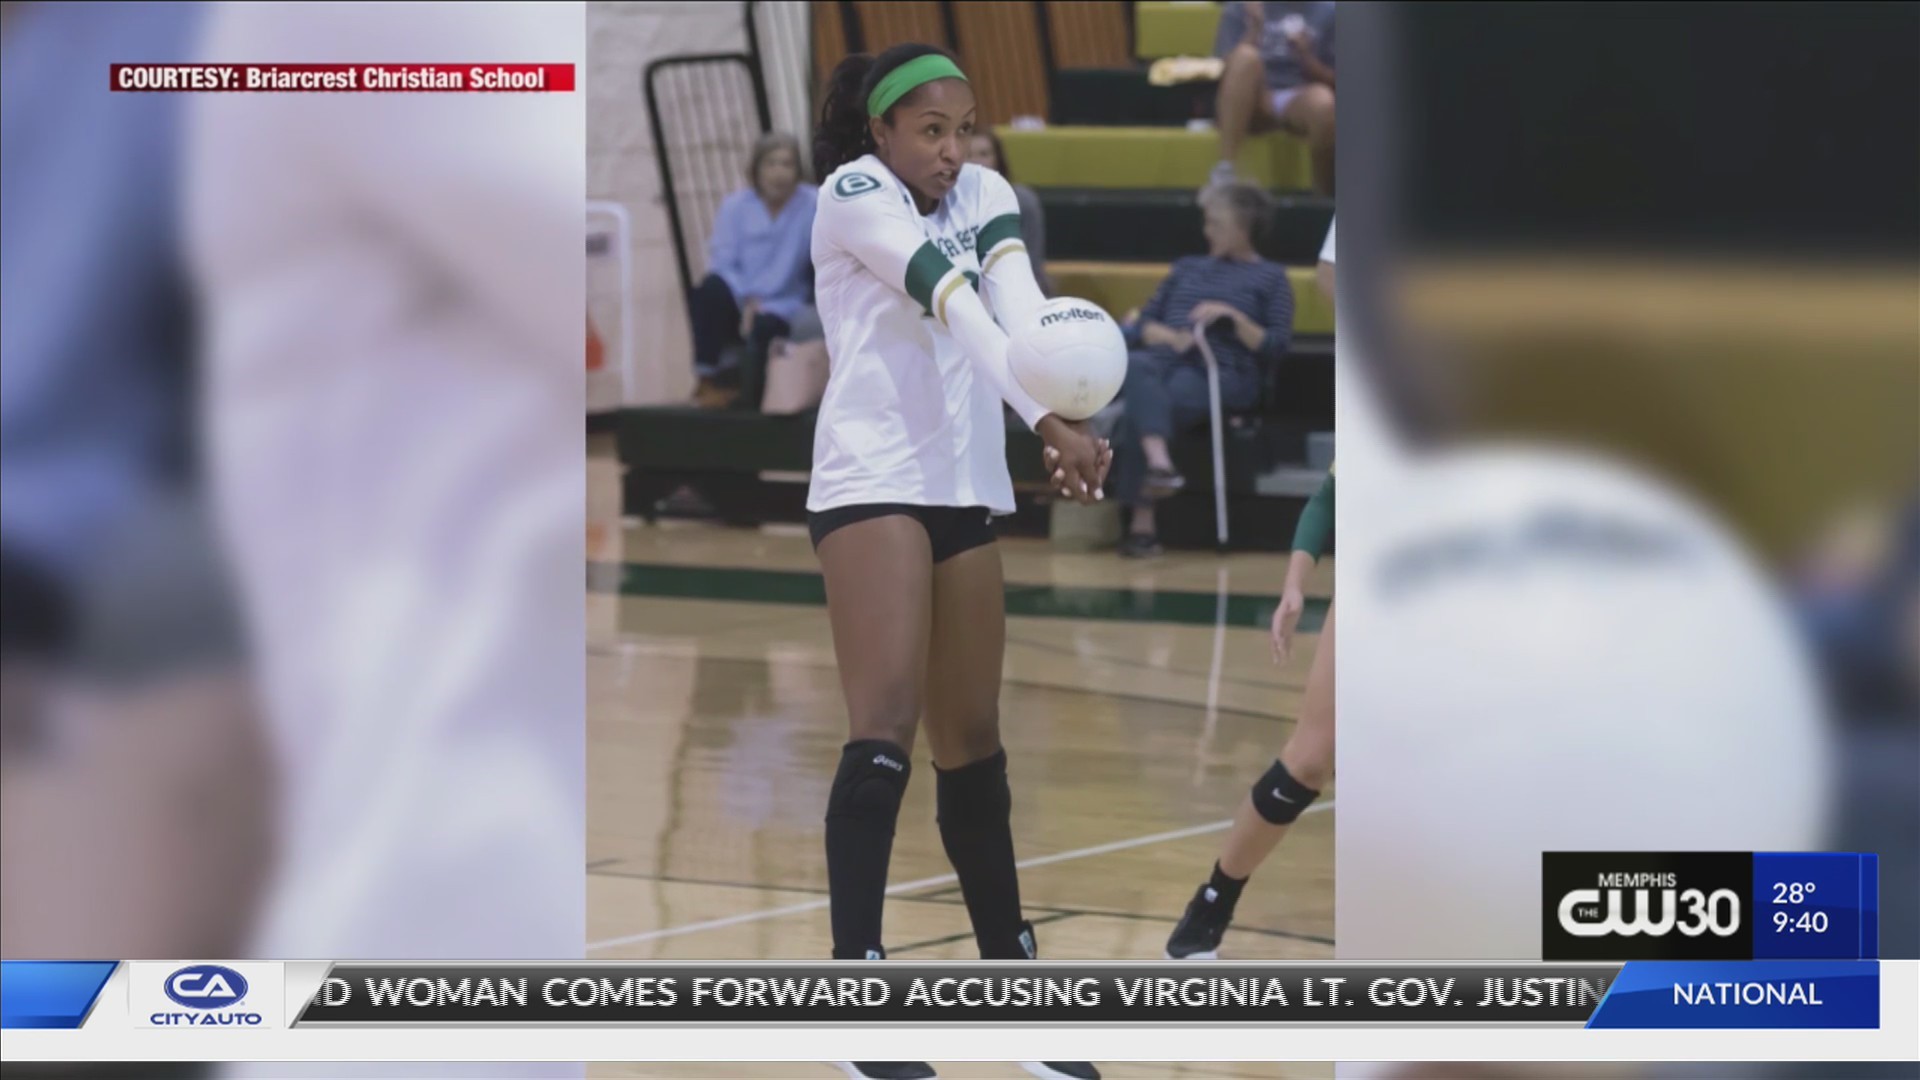 Local Cool Kid Briarcrest volleyball star